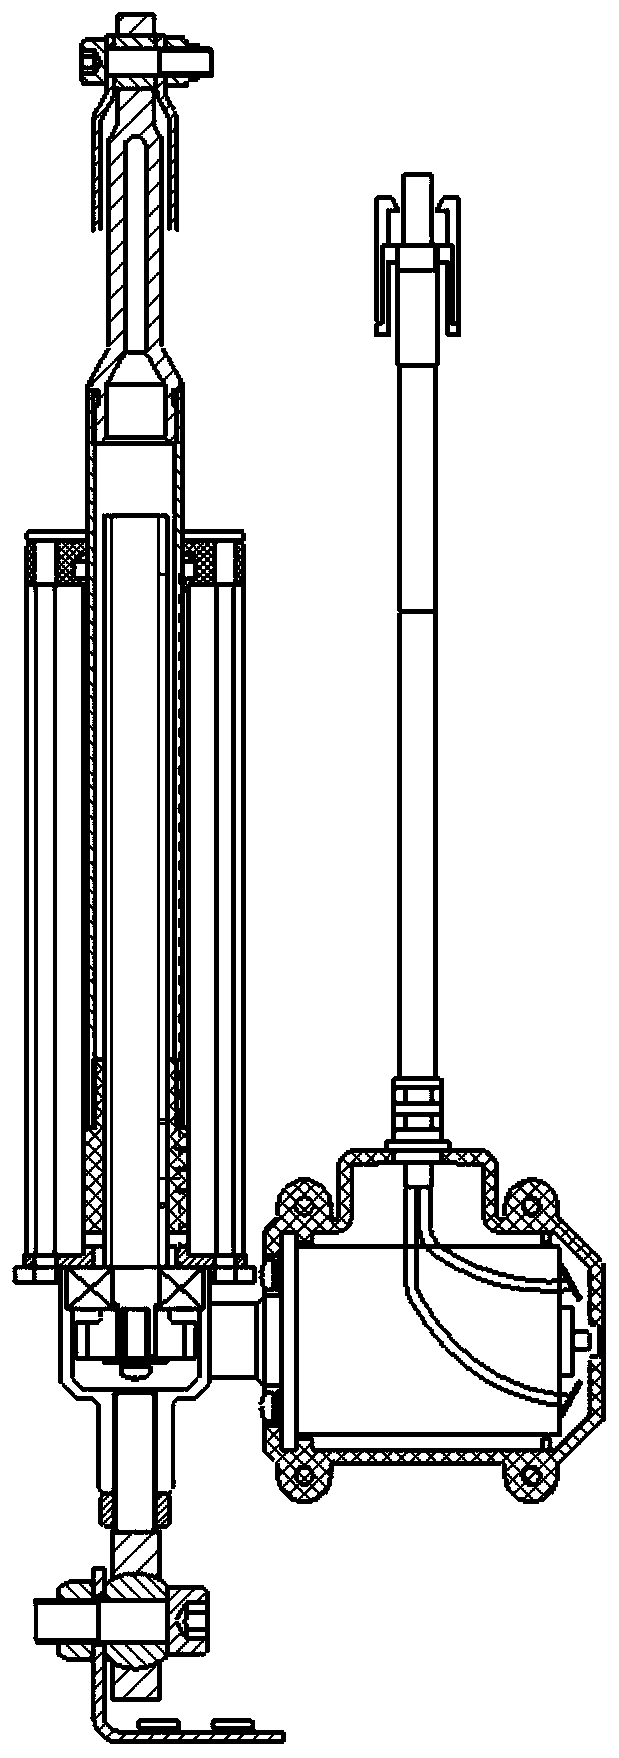 Lead screw assembly device applied to electric push rod